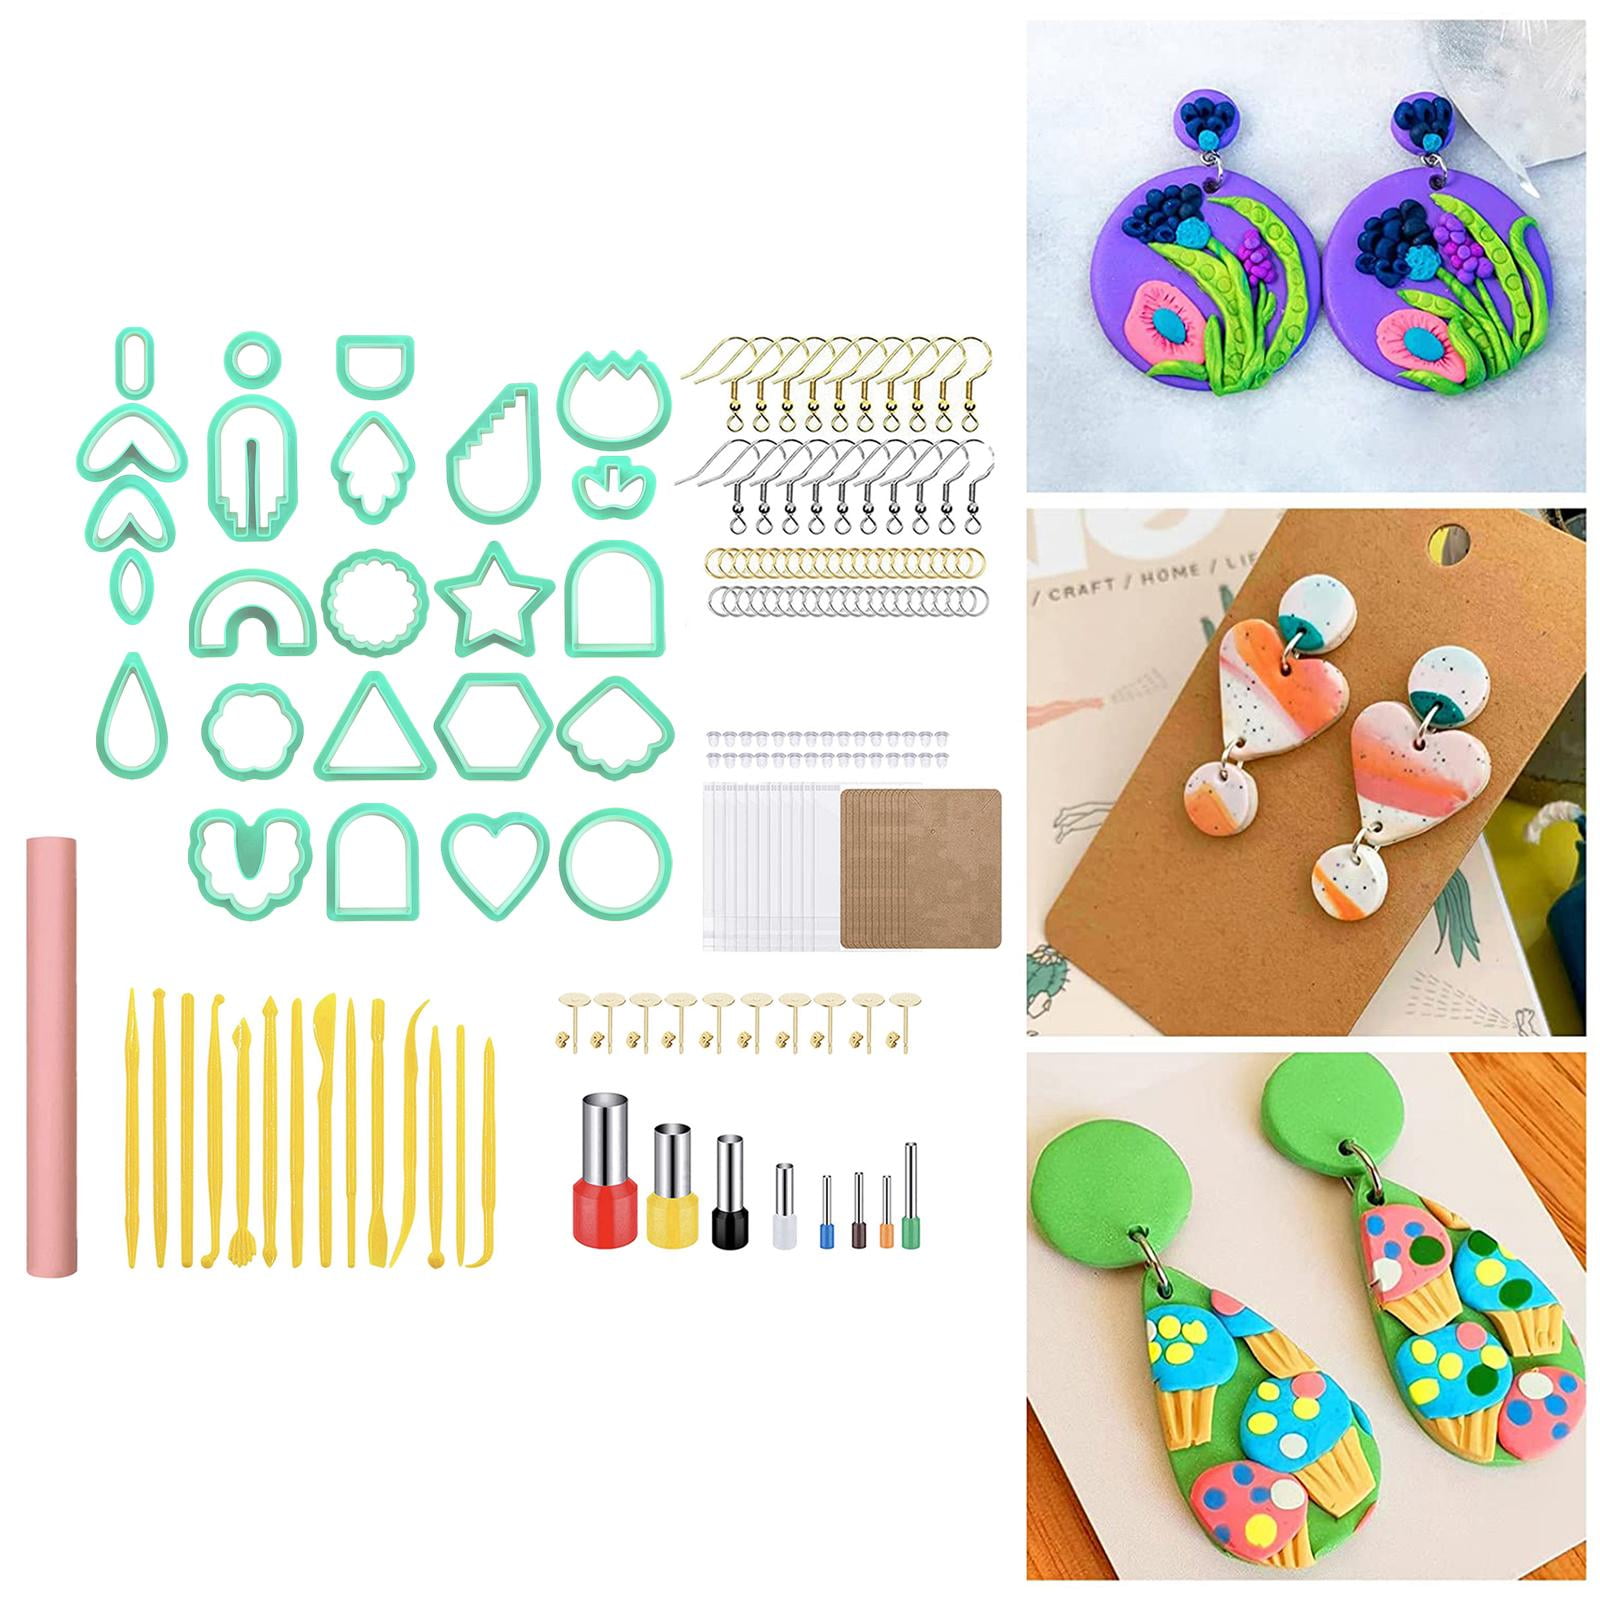 Easy DIY Clay Earring Kits, Gift Idea, Make your own earrings, Kids  craft